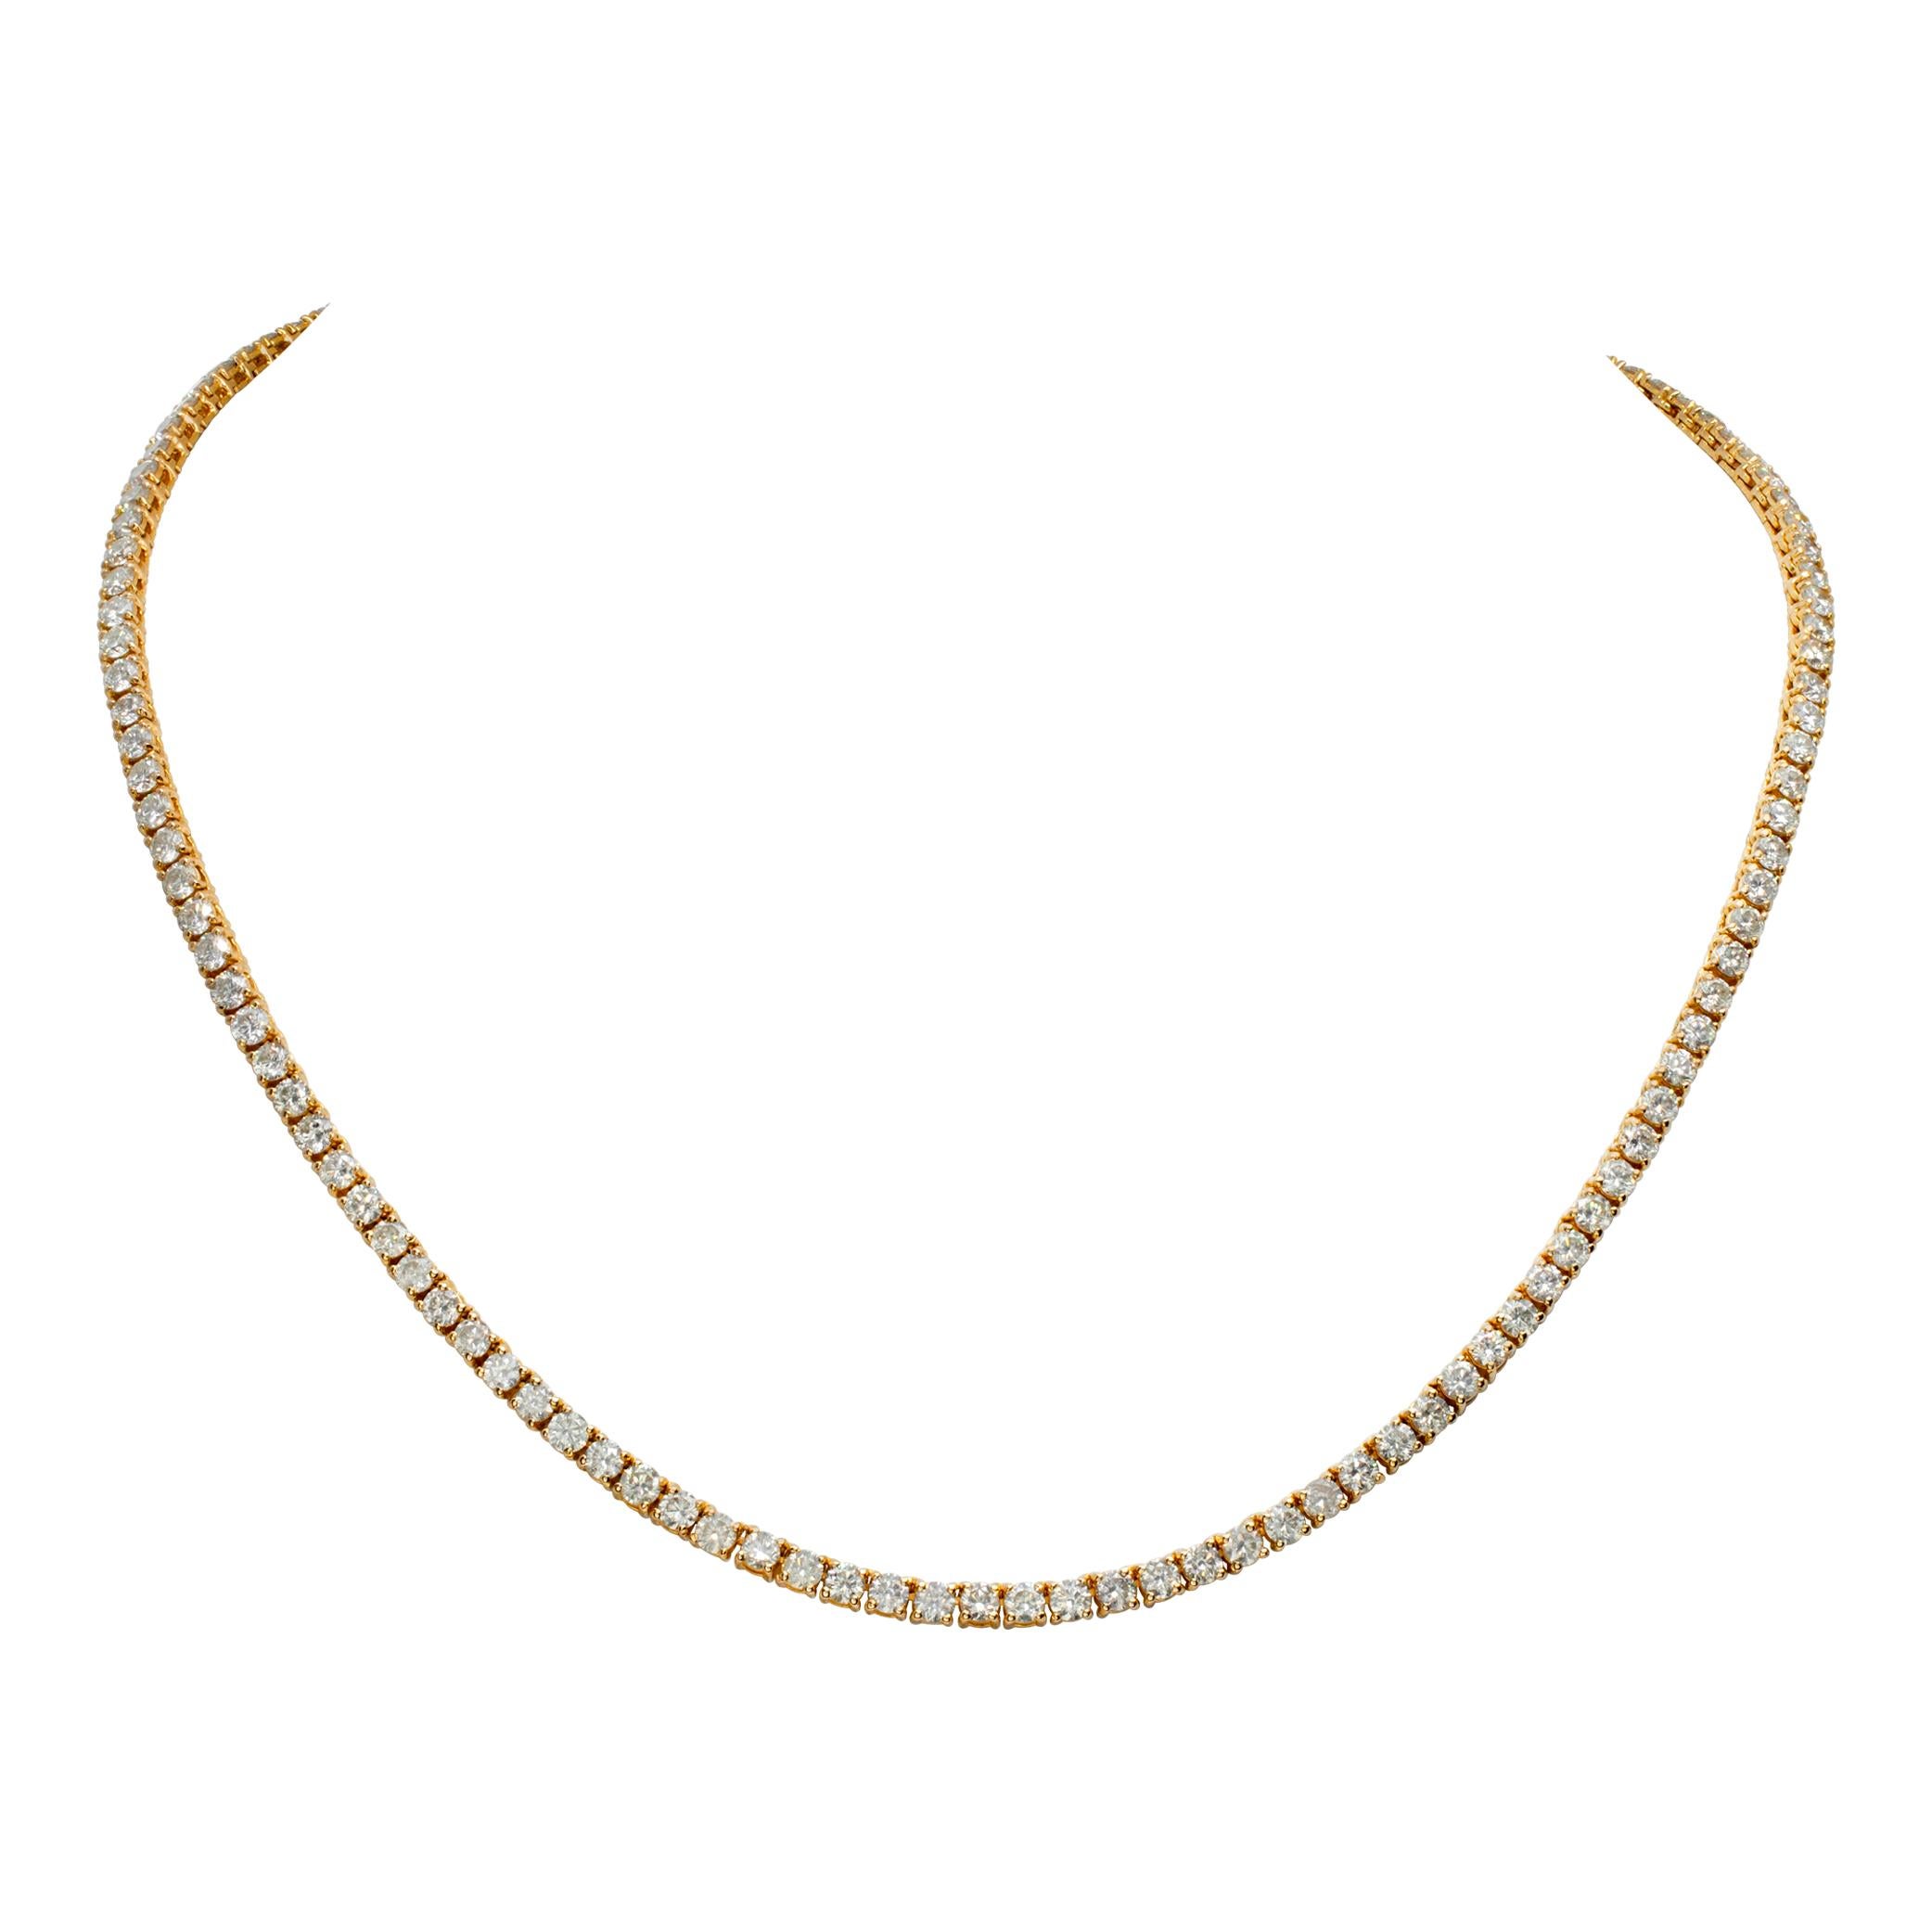 Diamond 14k yellow gold tennis necklace For Sale